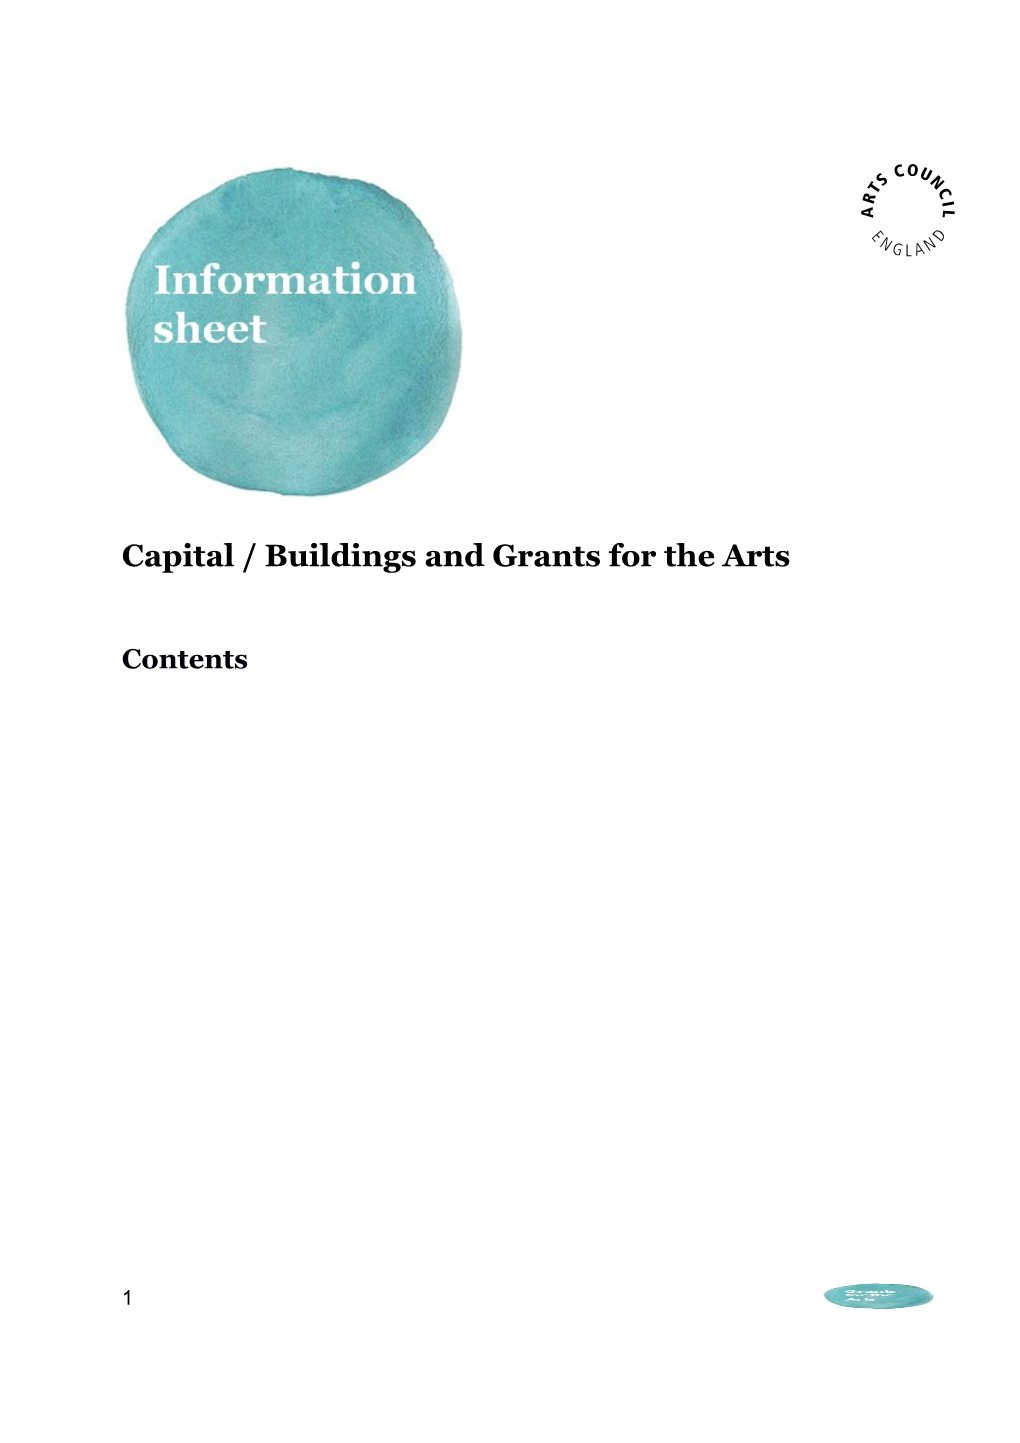 Capital / Buildings and Grants for the Arts